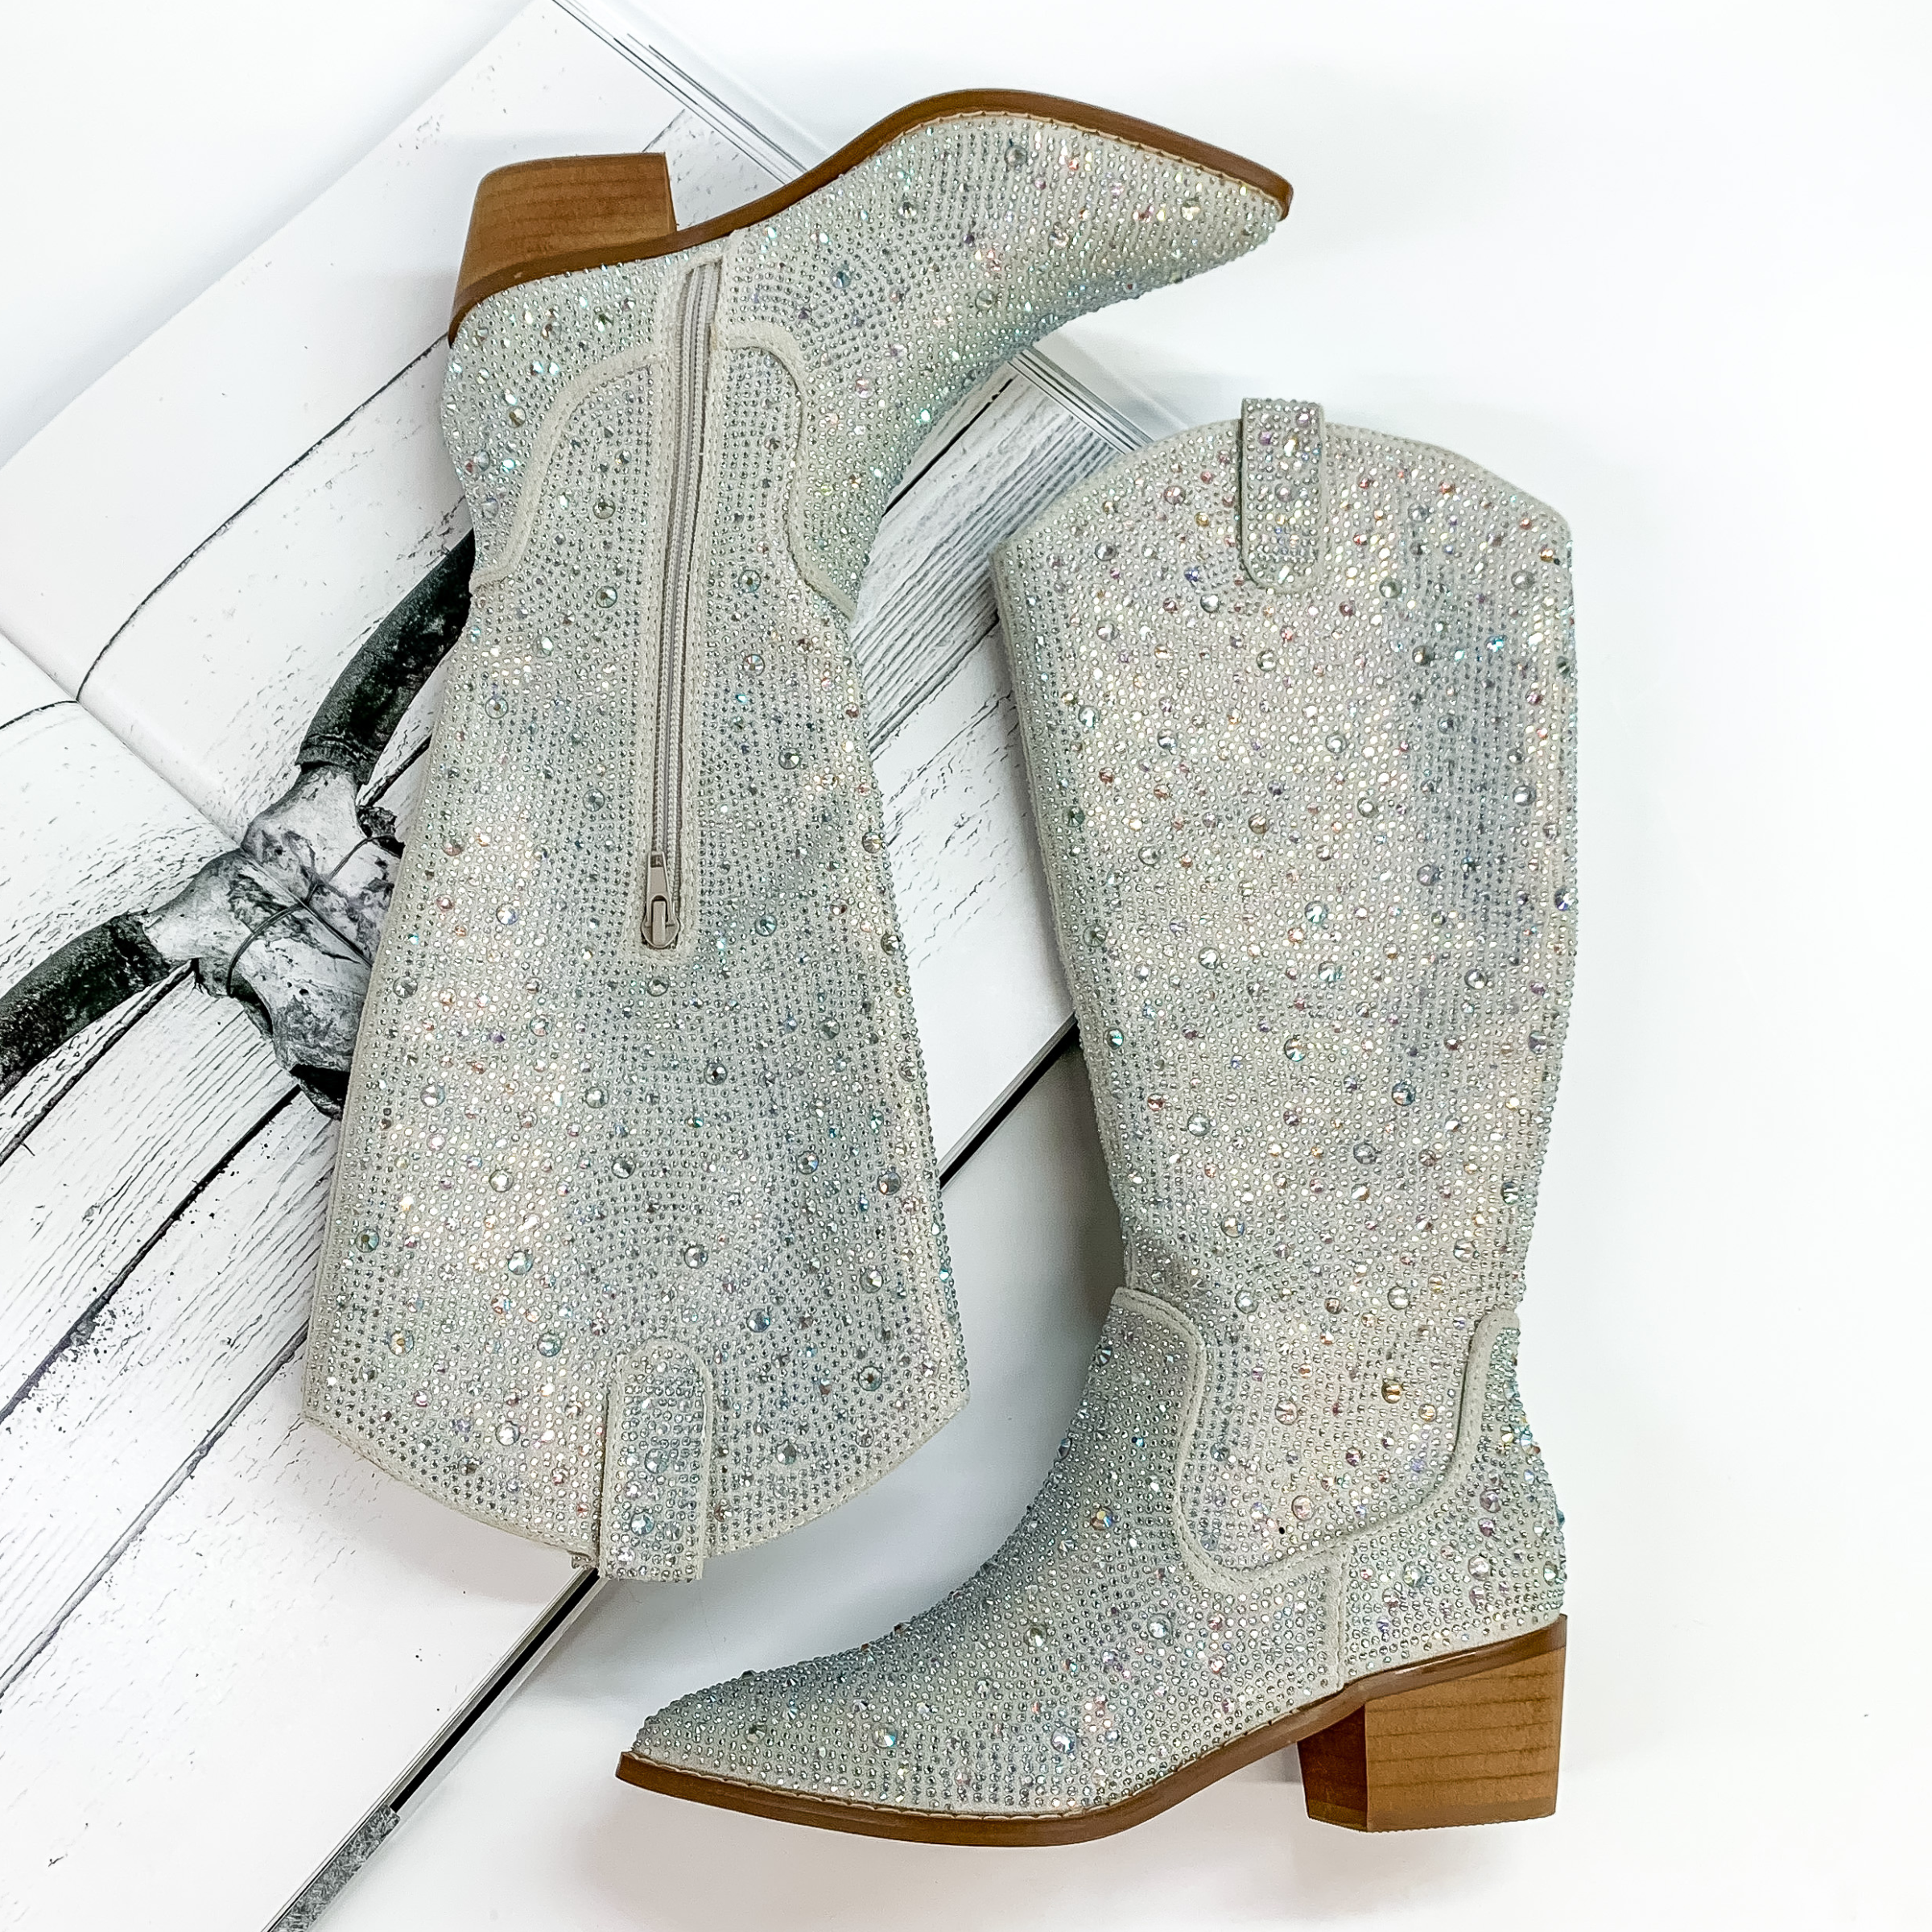 Very G | Kady High Rhinestone Cowboy Boots in Silver - Giddy Up Glamour Boutique